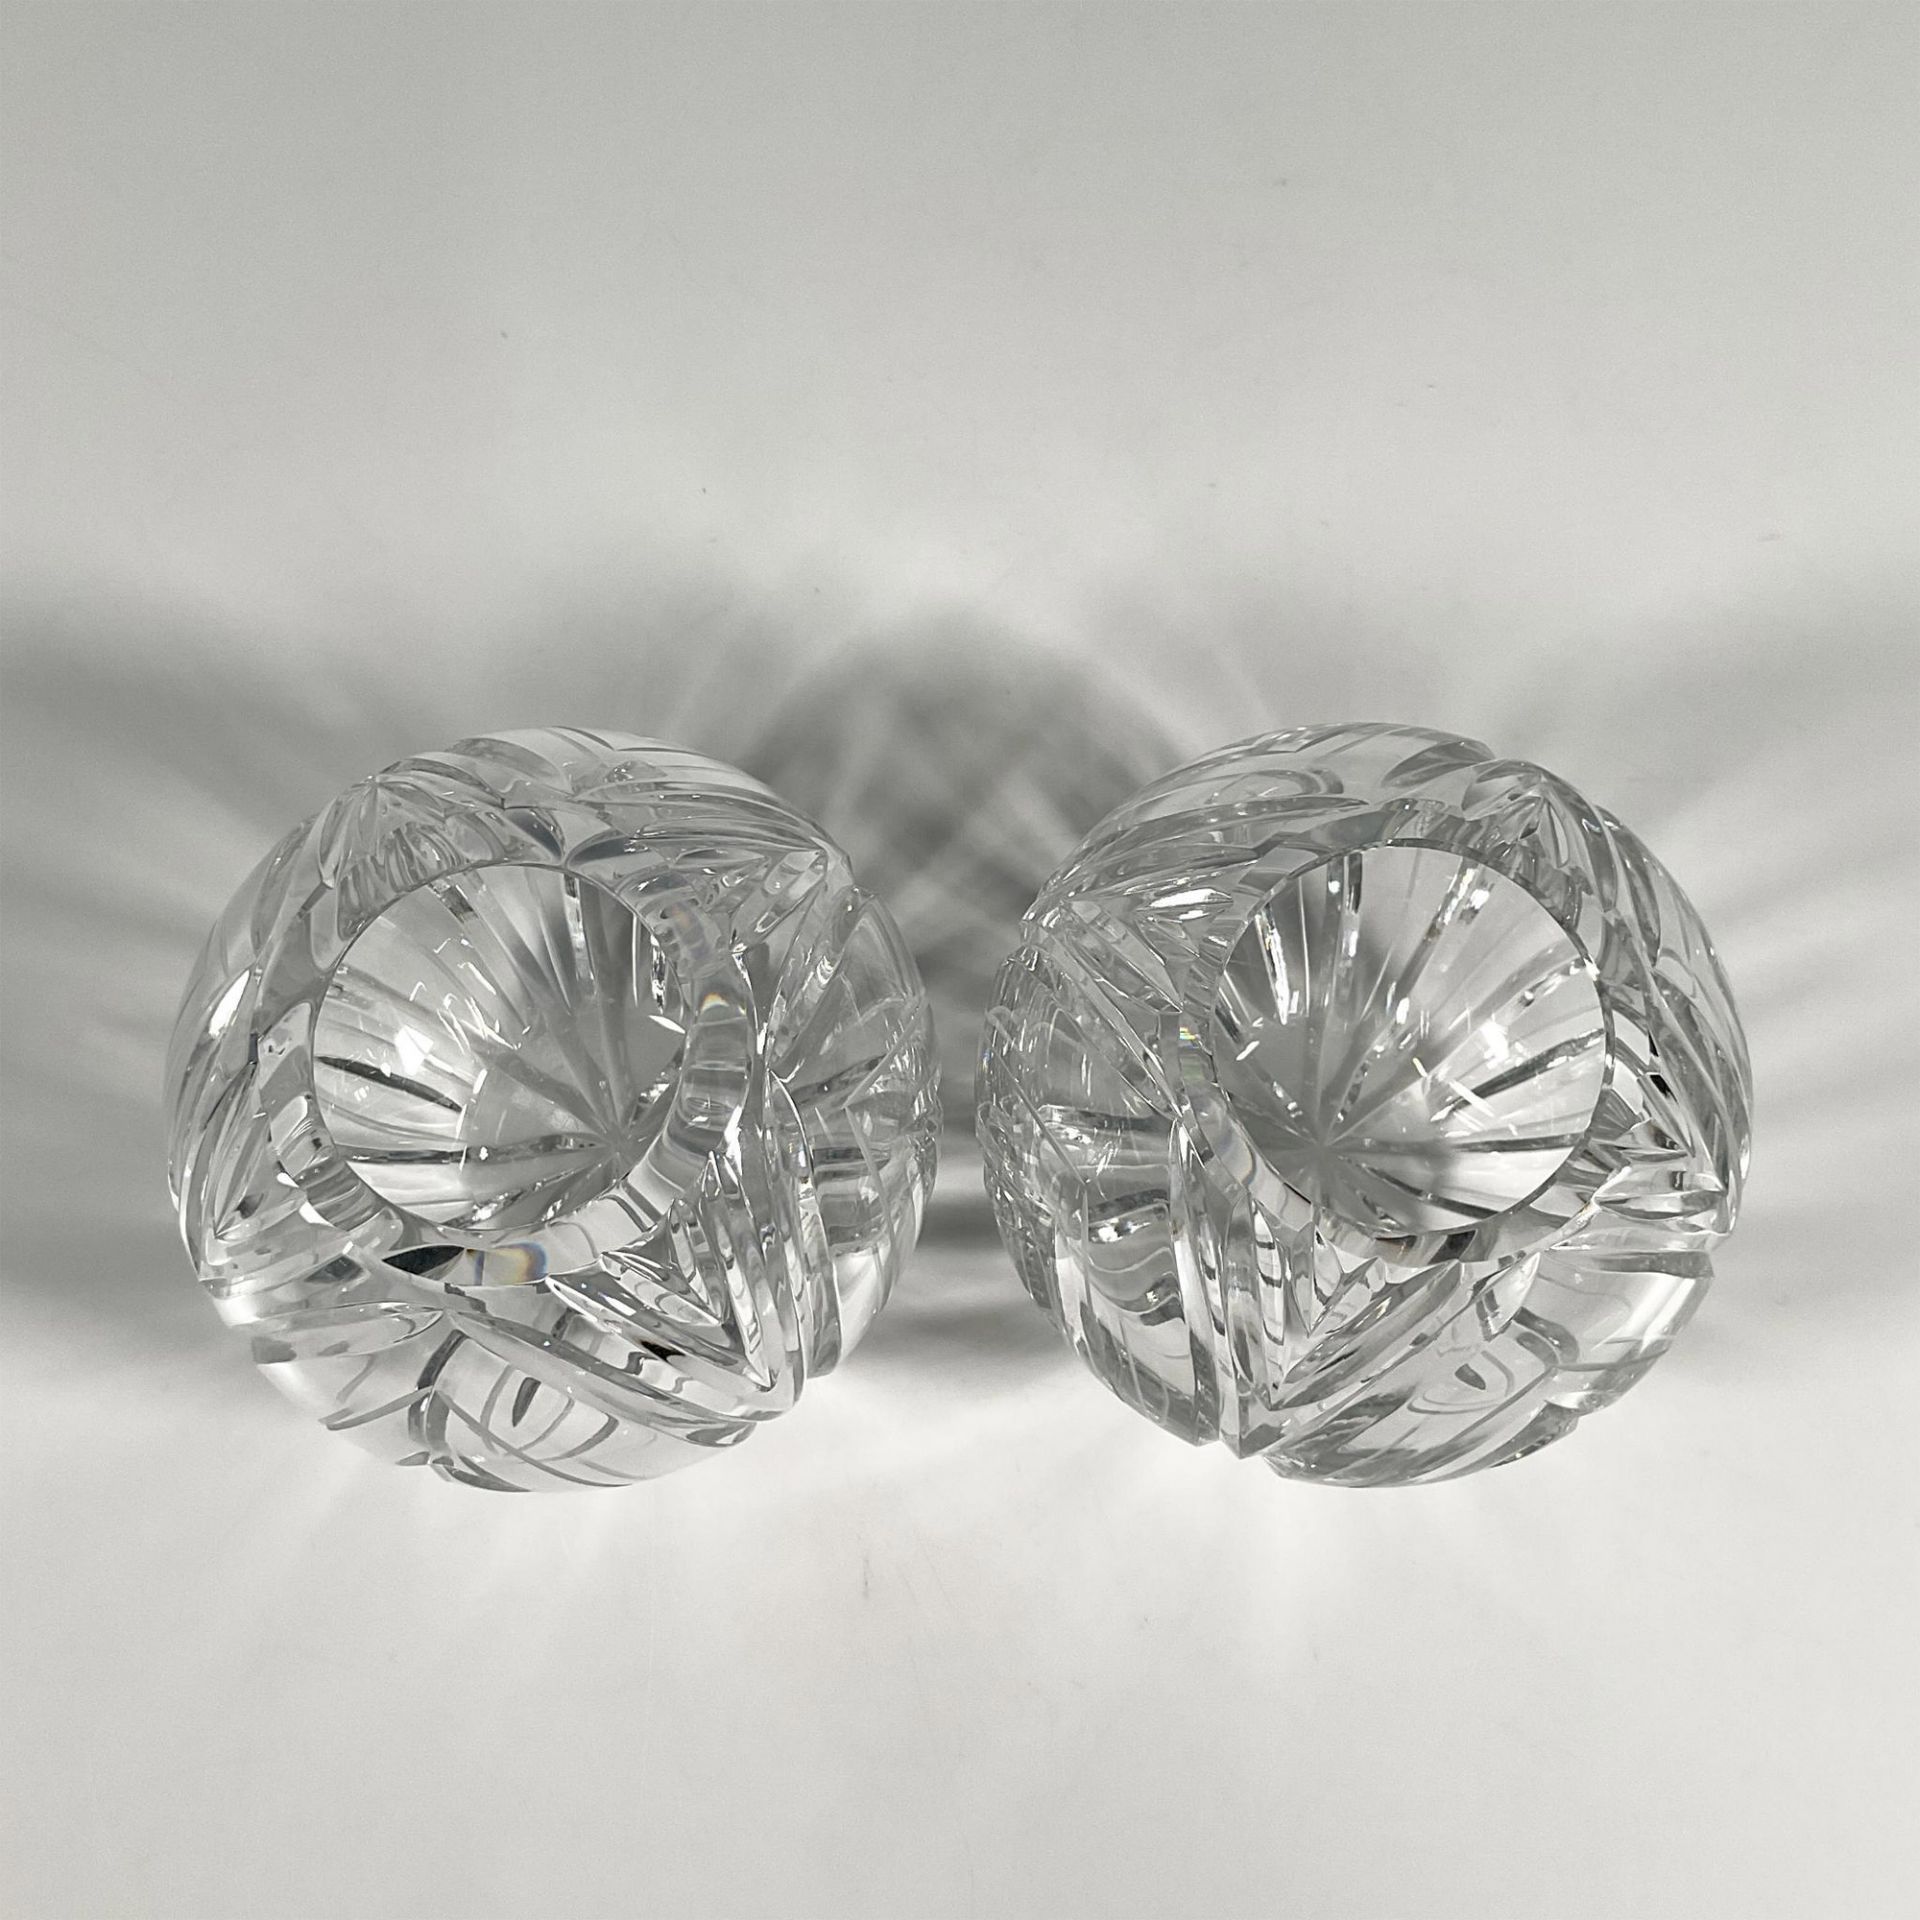 2pc Cut Crystal Vases - Image 2 of 3